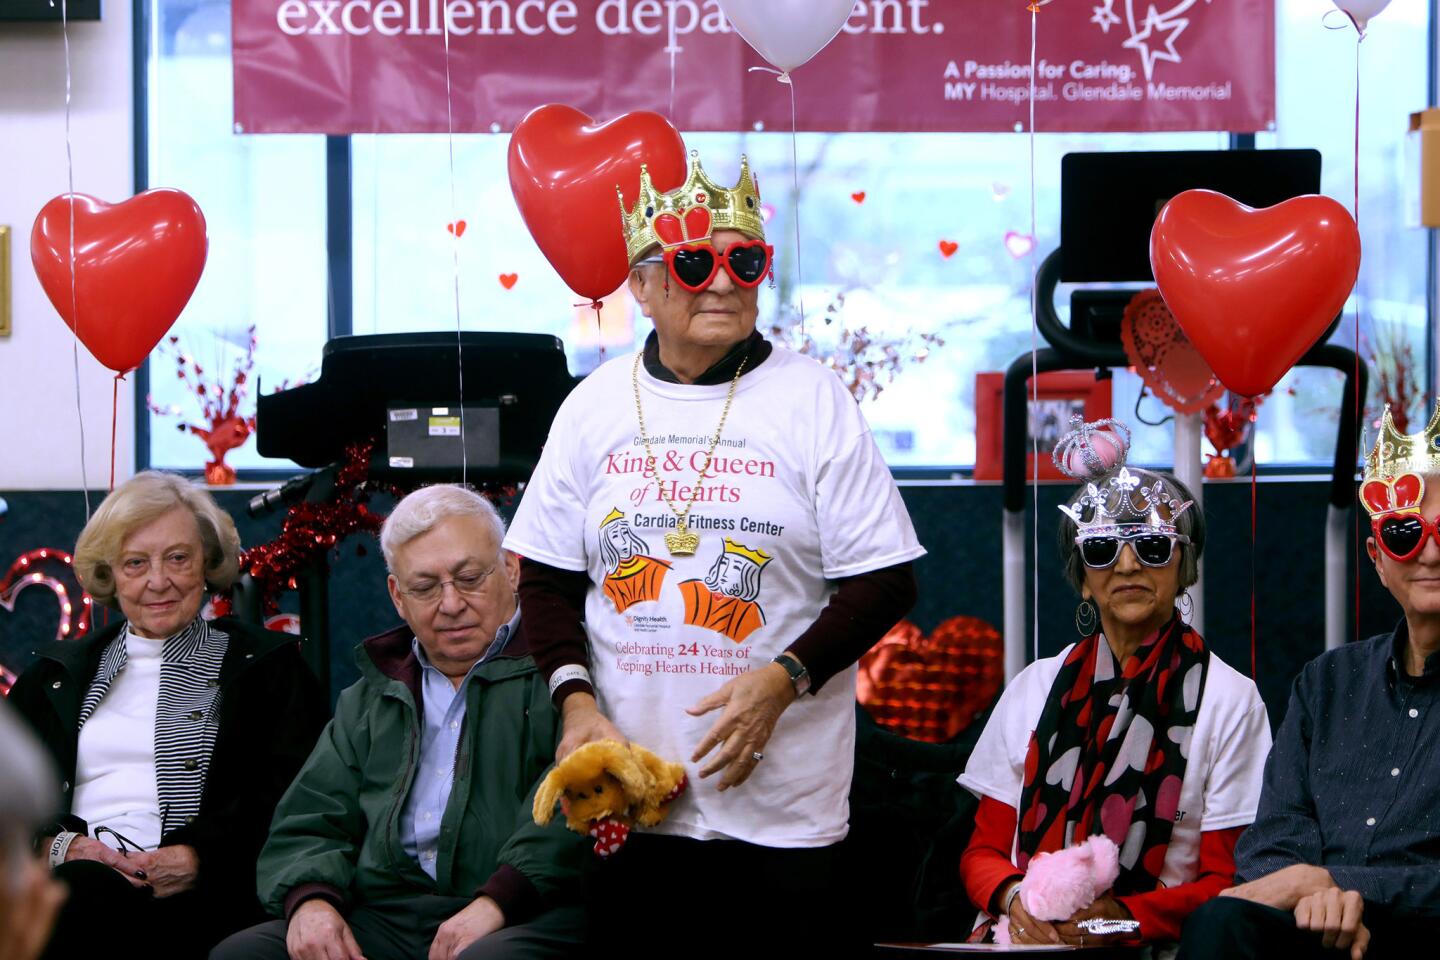 Wadhu Bhojwani, standing, was crowned Senior King at the 24th annual King and Queen of Hearts event, at the Cardiac Fitness Center, at Dignity Health Glendale Memorial Hospital and Health Center, on Thursday, Feb. 14, 2019.